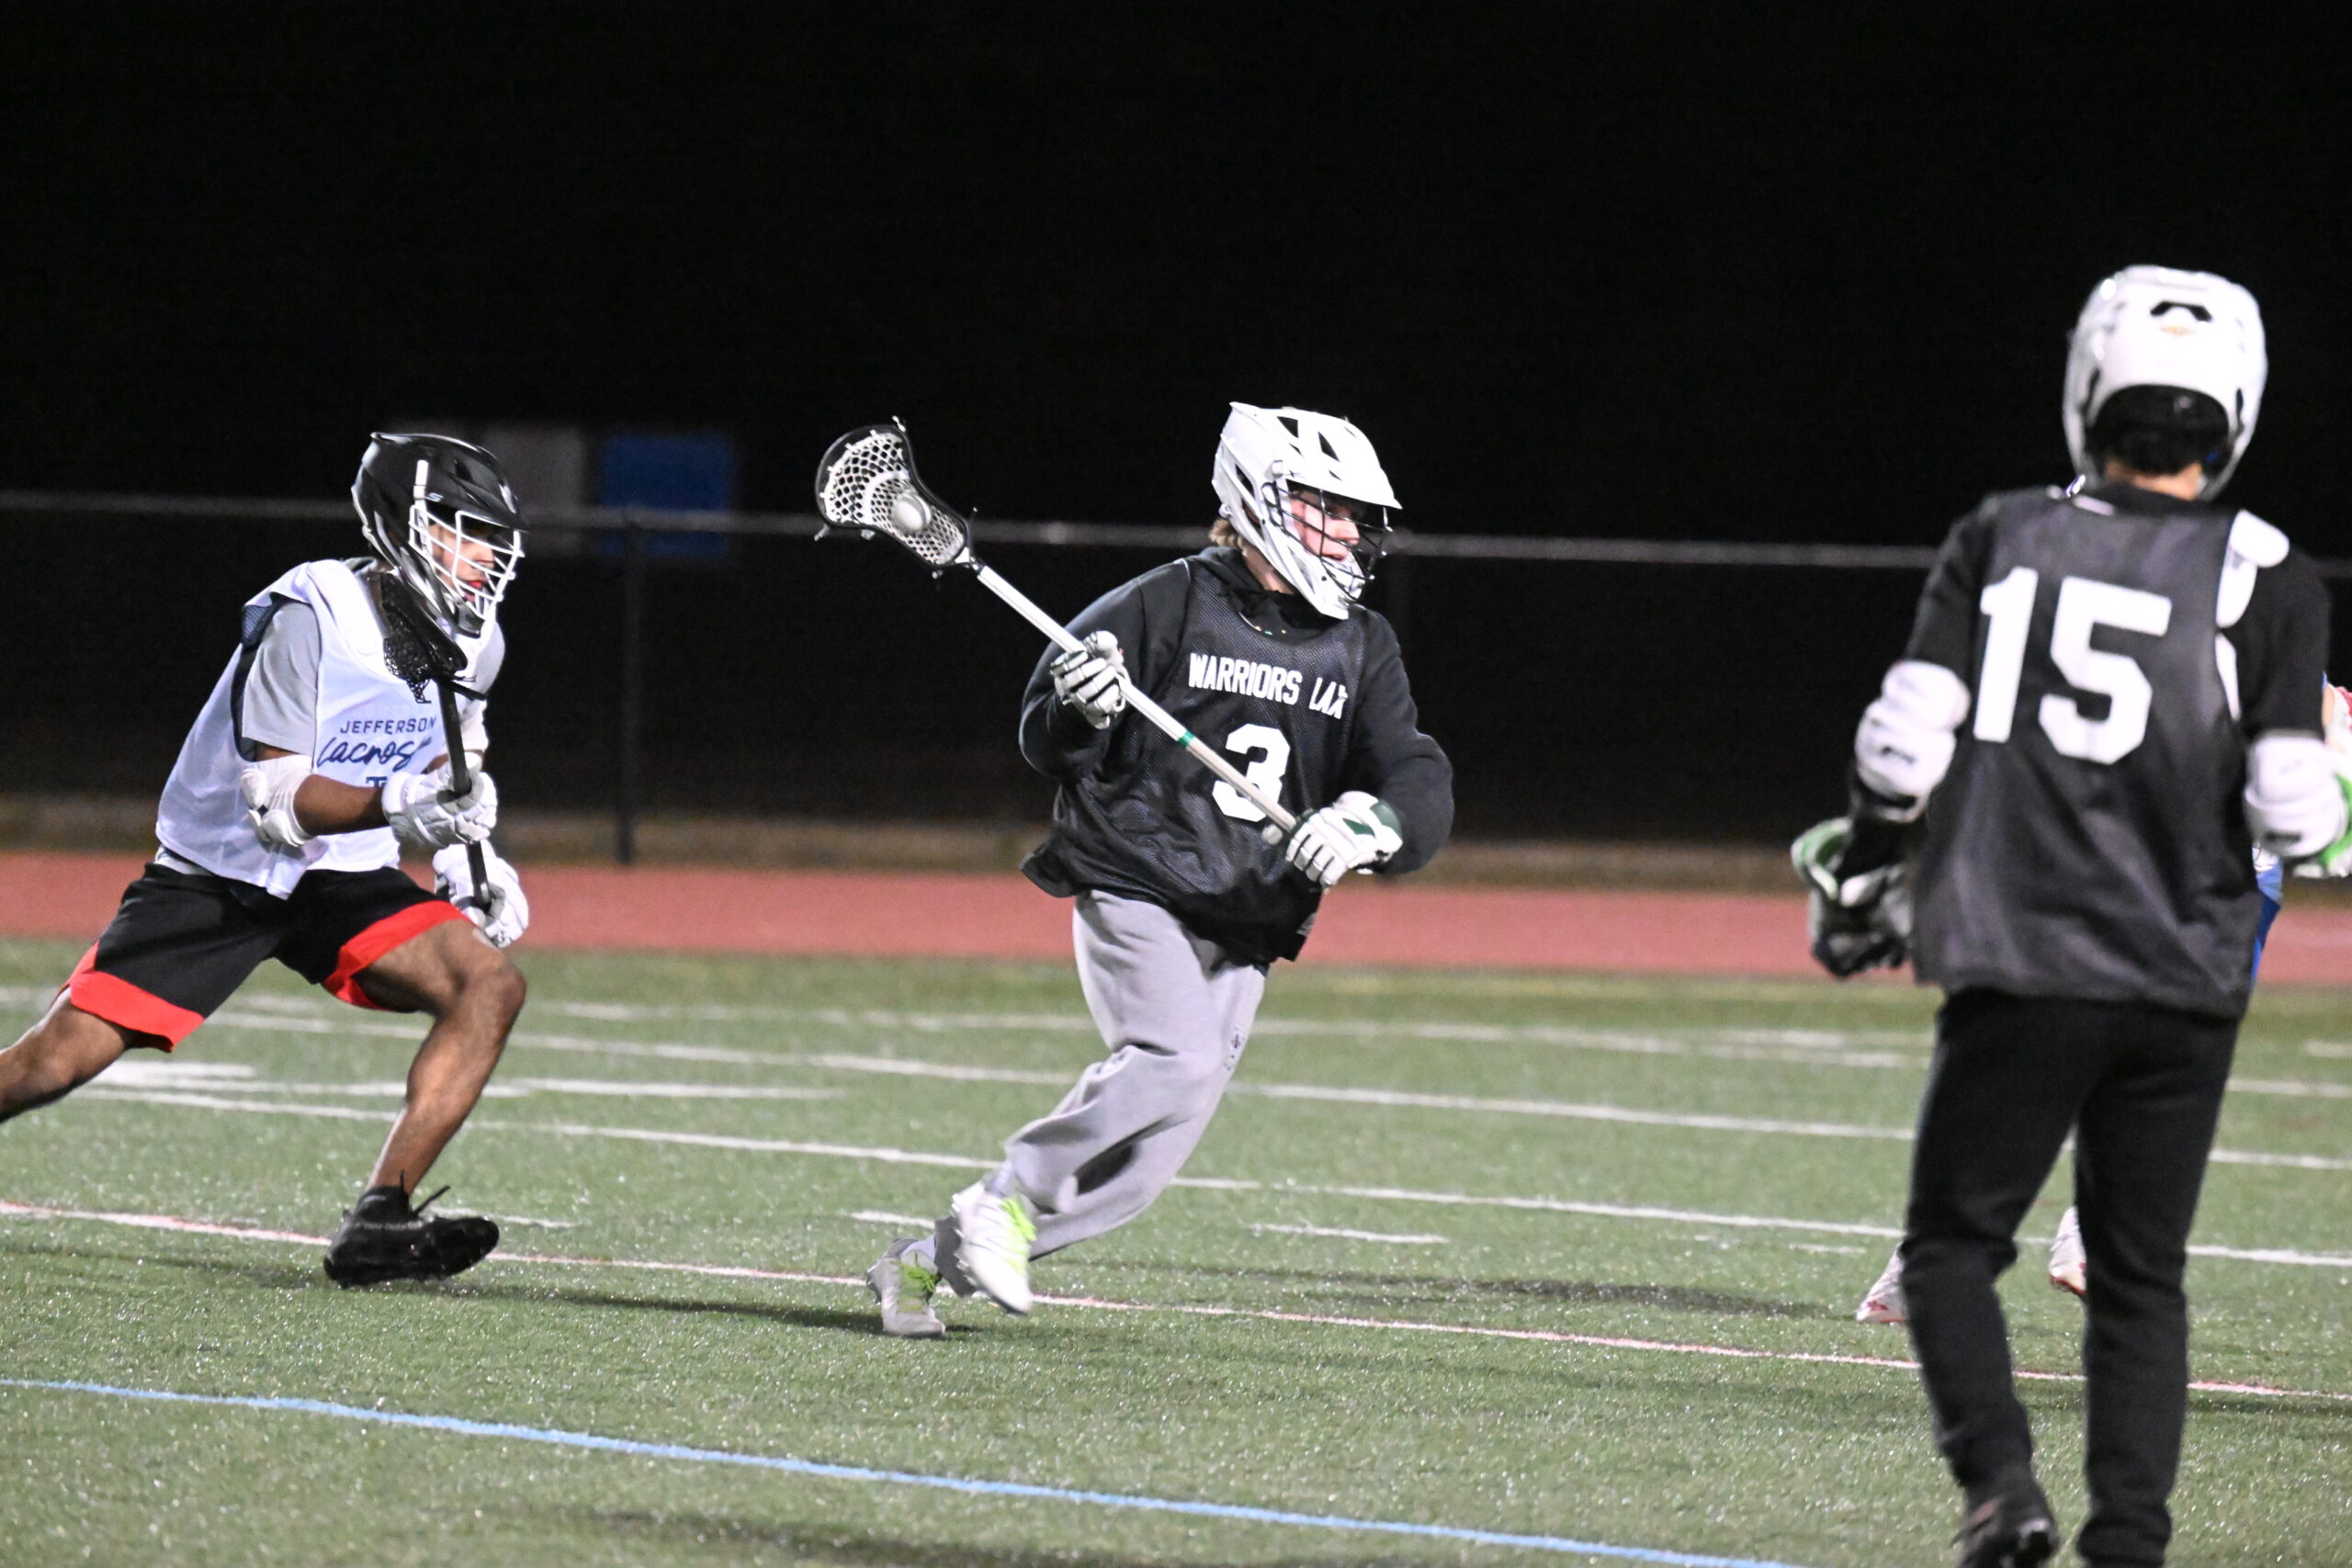 WHS lacrosse player in action